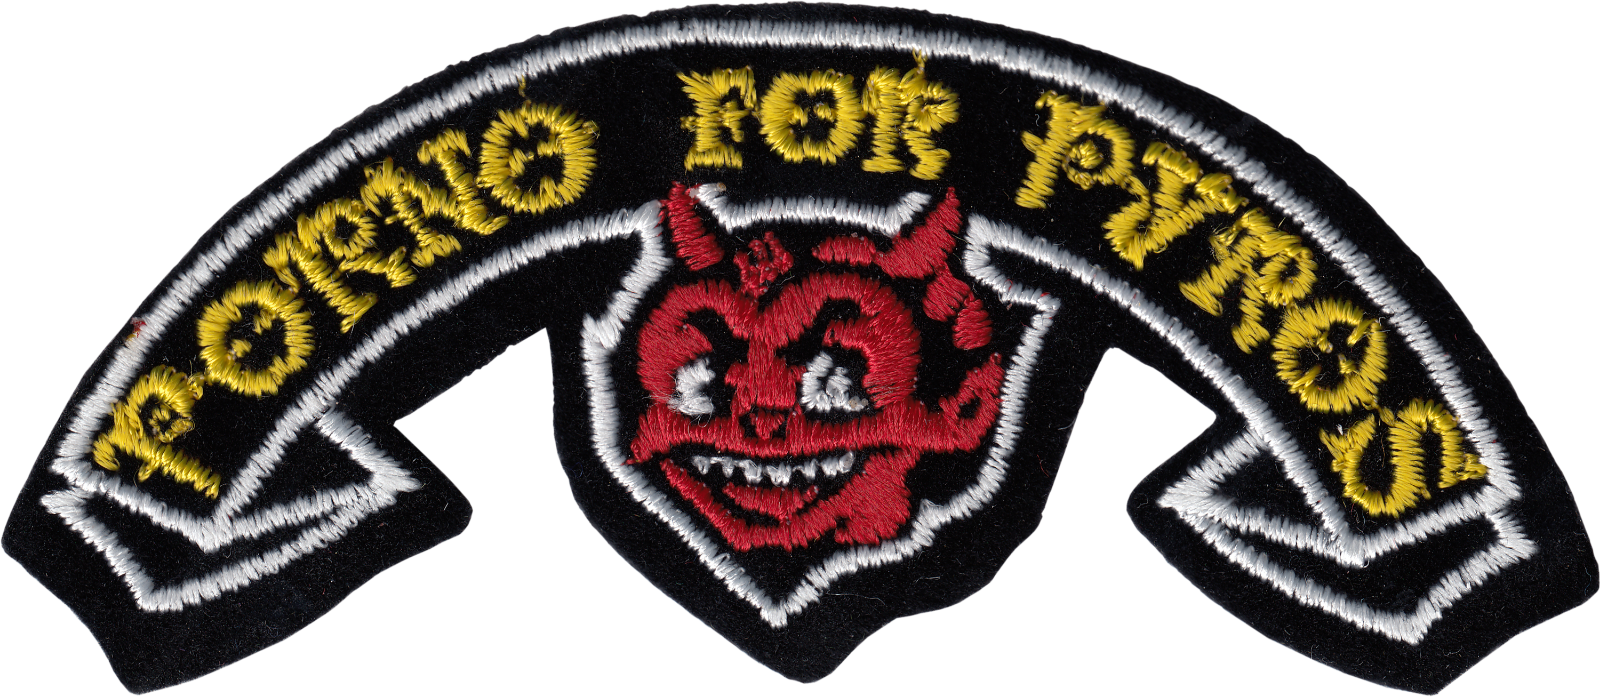 Patch - Porno For Pyros Devil Logo Rock Music Band Embroidered Sew Iron On 9319